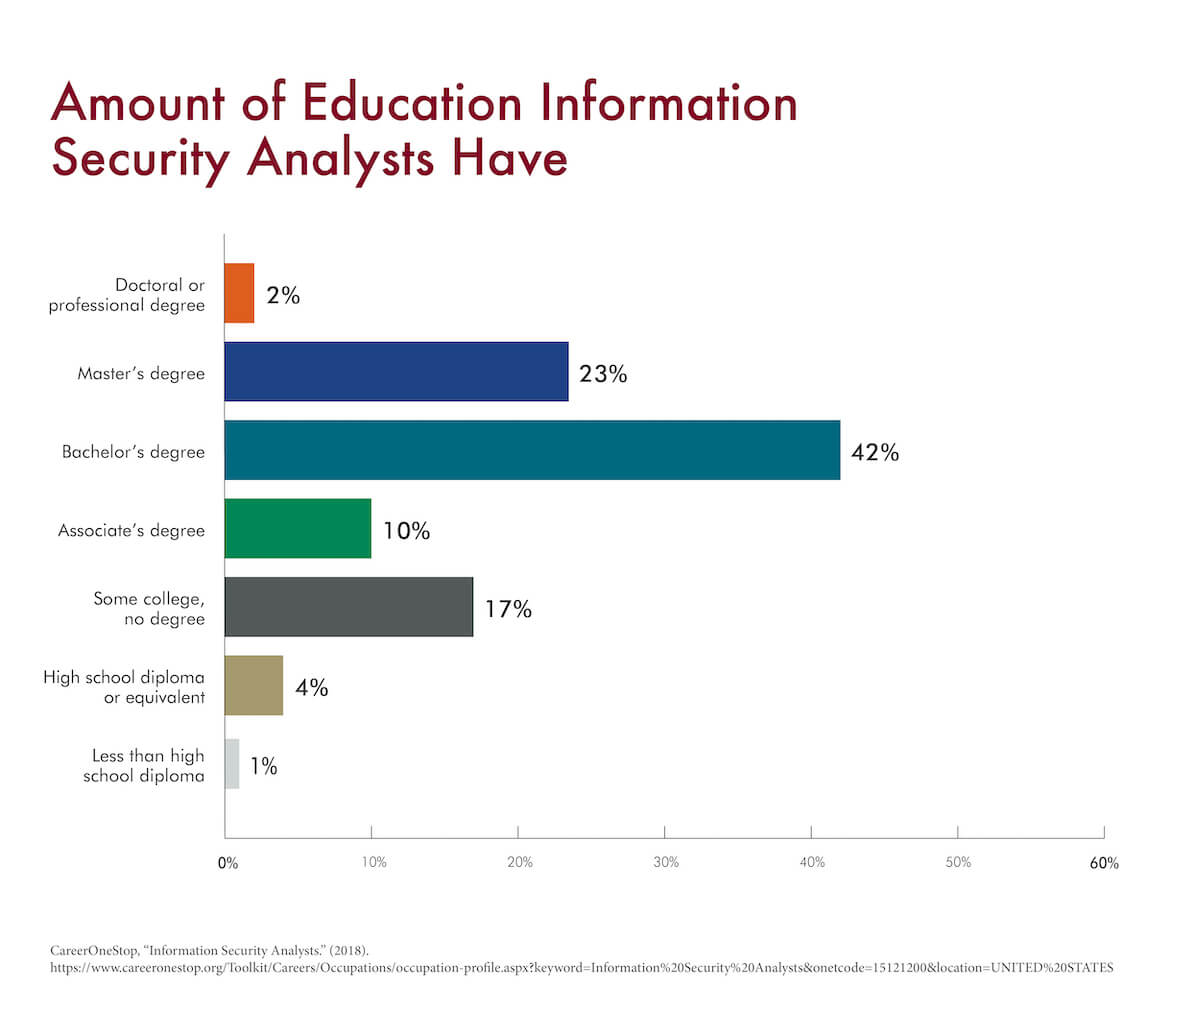 A chart that shows how much education information security analysts have.